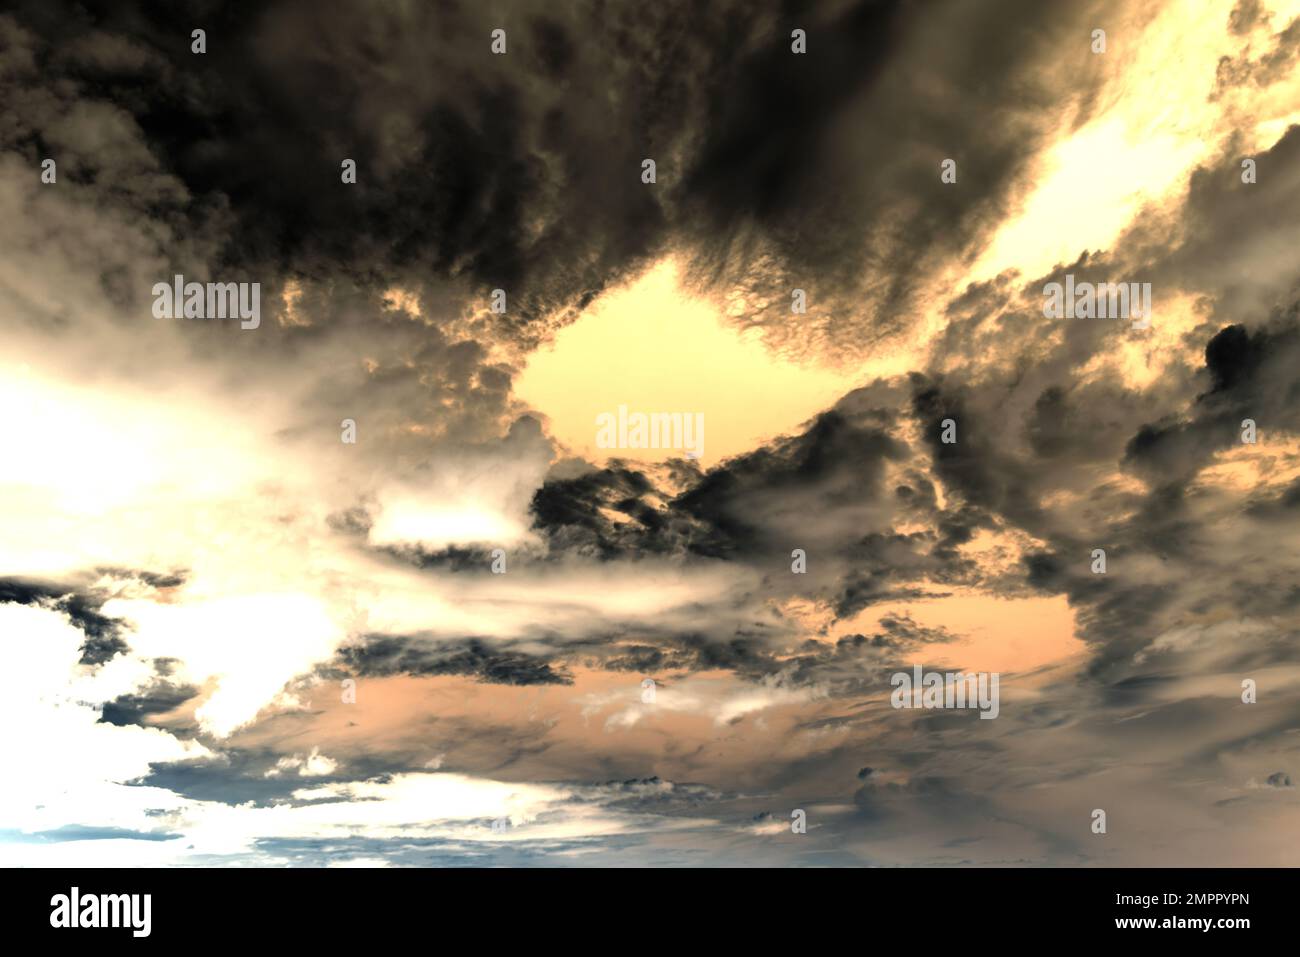 Abstract photography of clouds on a bright orange from the sun dark gloomy sky Stock Photo